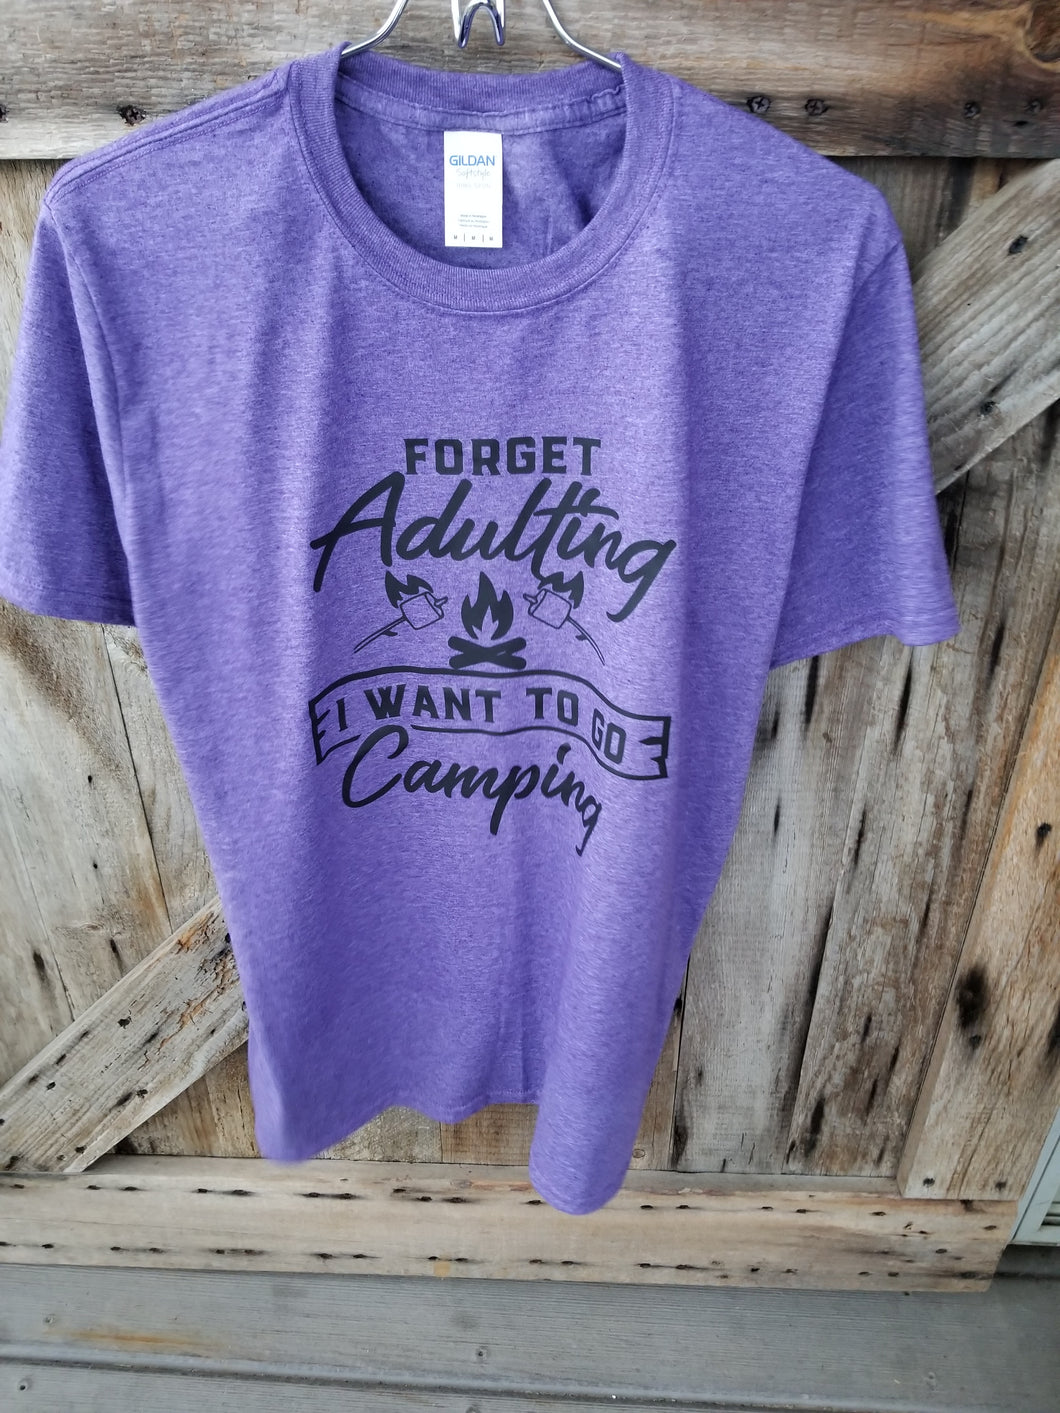 Forget Adulting - I want to go camping t-shirt